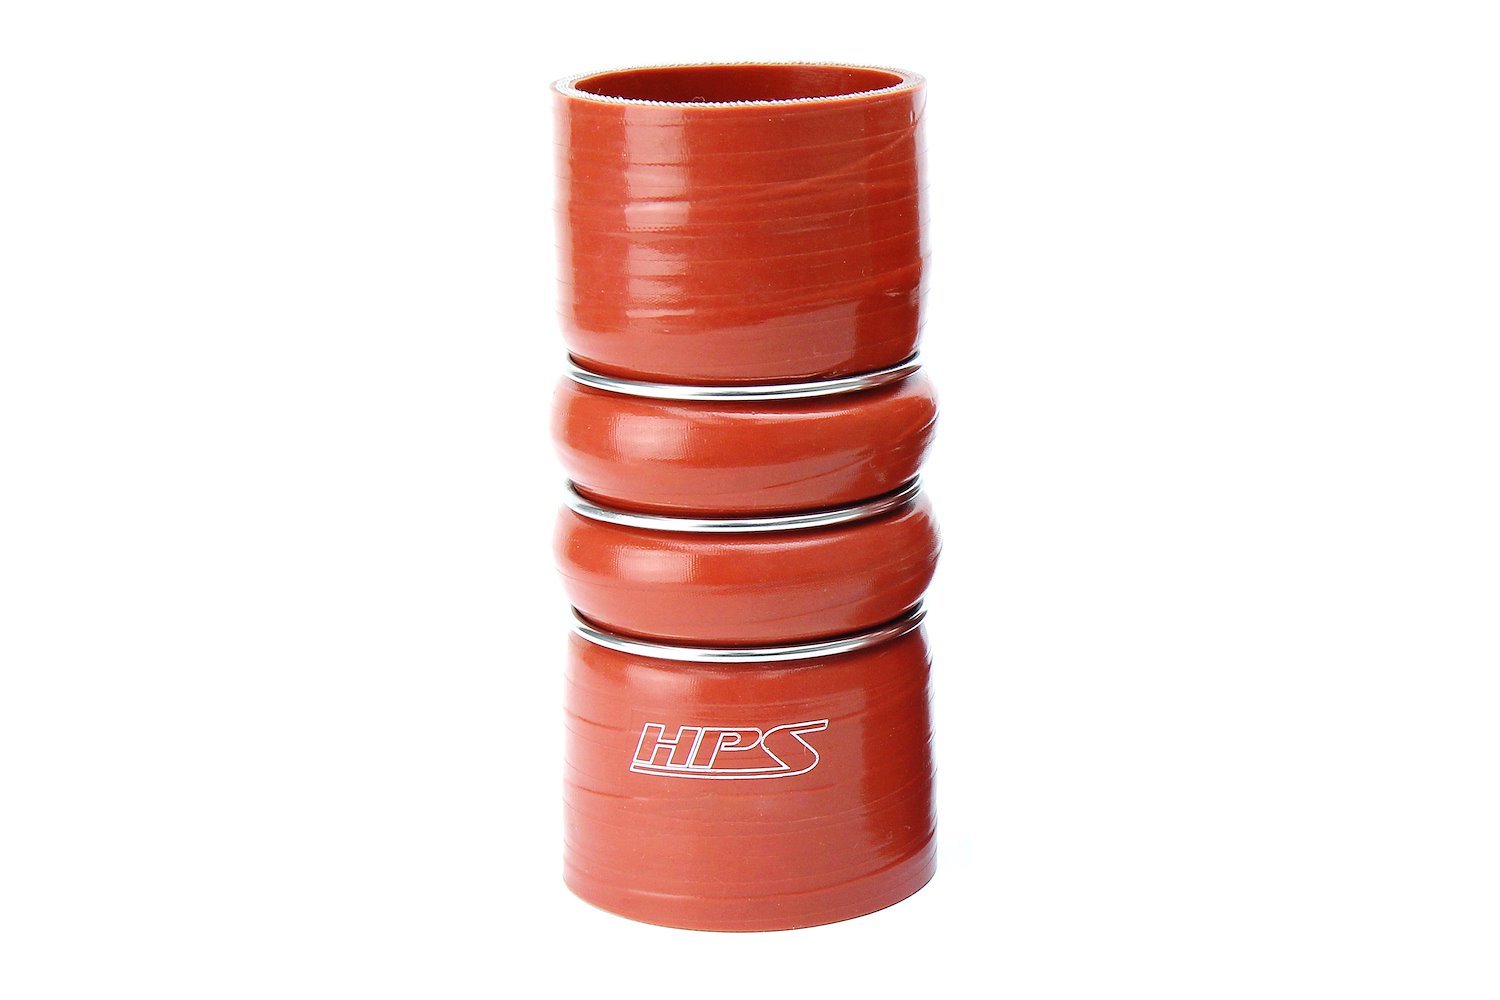 CAC-369-HOT Silicone CAC Hose, Silicone CAC Hose Hot, High-Temp 4-Ply Aramid Reinforced, 3-11/16 in. ID, 6 in. Long